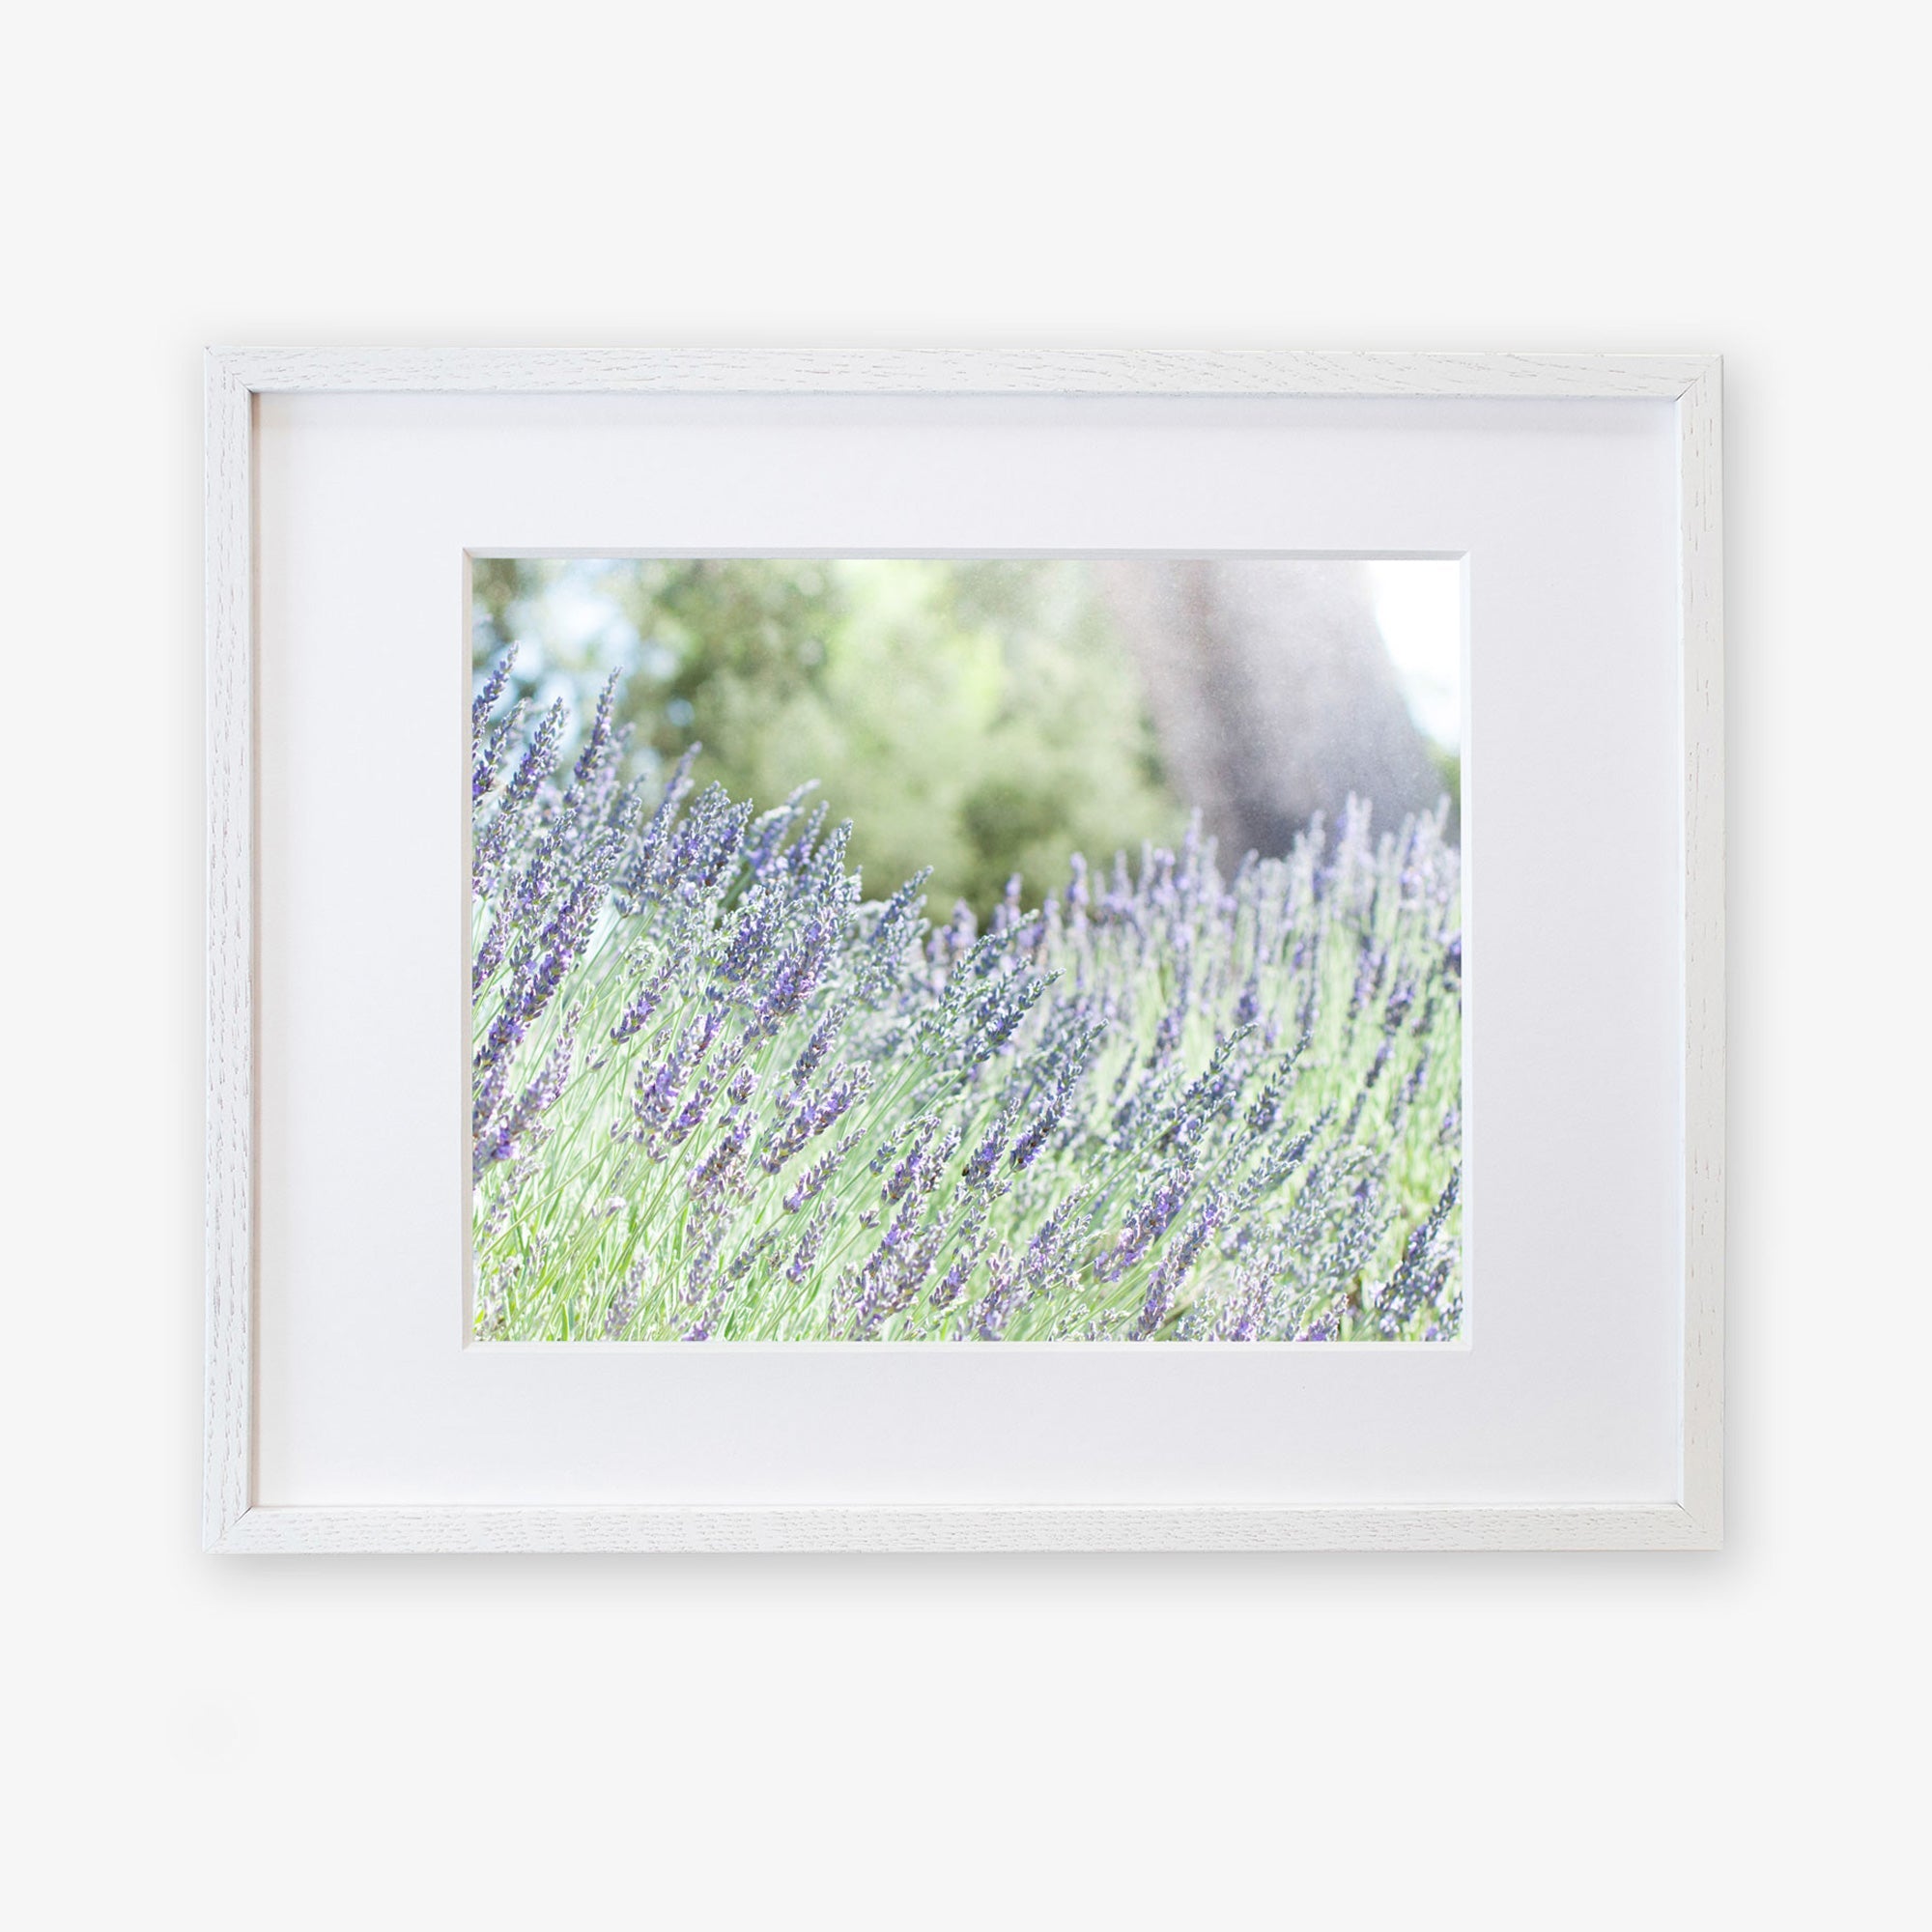 A framed photograph of a vibrant lavender field in bloom. The lavender flowers are a mix of purple hues, set against a soft-focus background of green foliage and trees. Printed on archival photographic paper, the frame is white, complementing the light, airy feel of this Rustic Floral Print, &#39;Fields of Lavender&#39; by Offley Green.